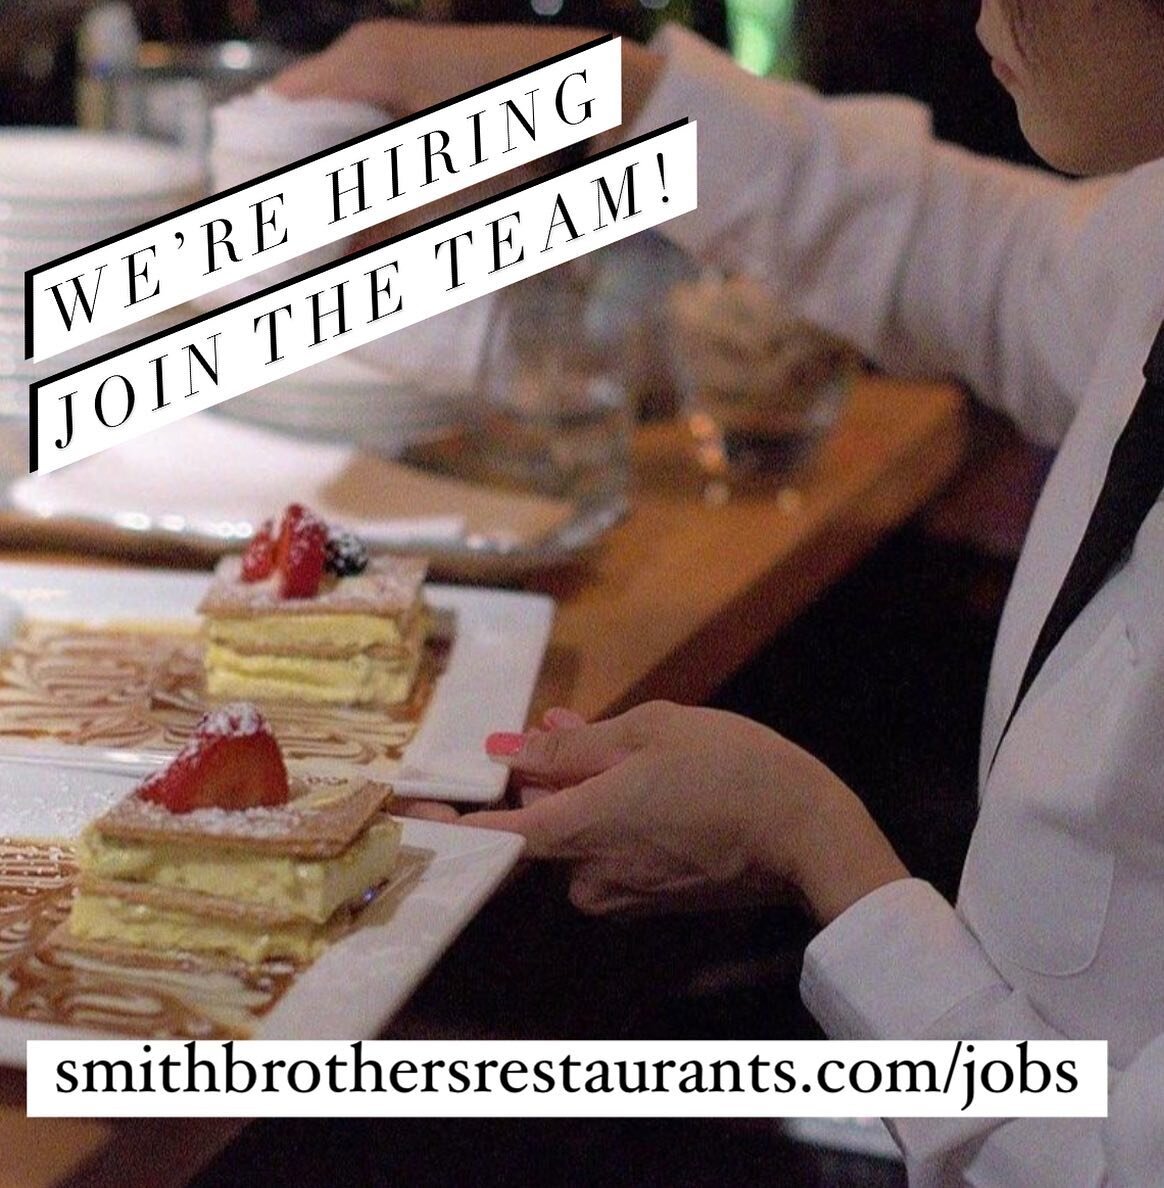 Join the award-winning Smith Brothers team! Hiring front and back of house positions. Tag someone you think should apply!👇

Copy and paste the following link in a browser to see position details and submit an application:

https://www.smithbrothersr